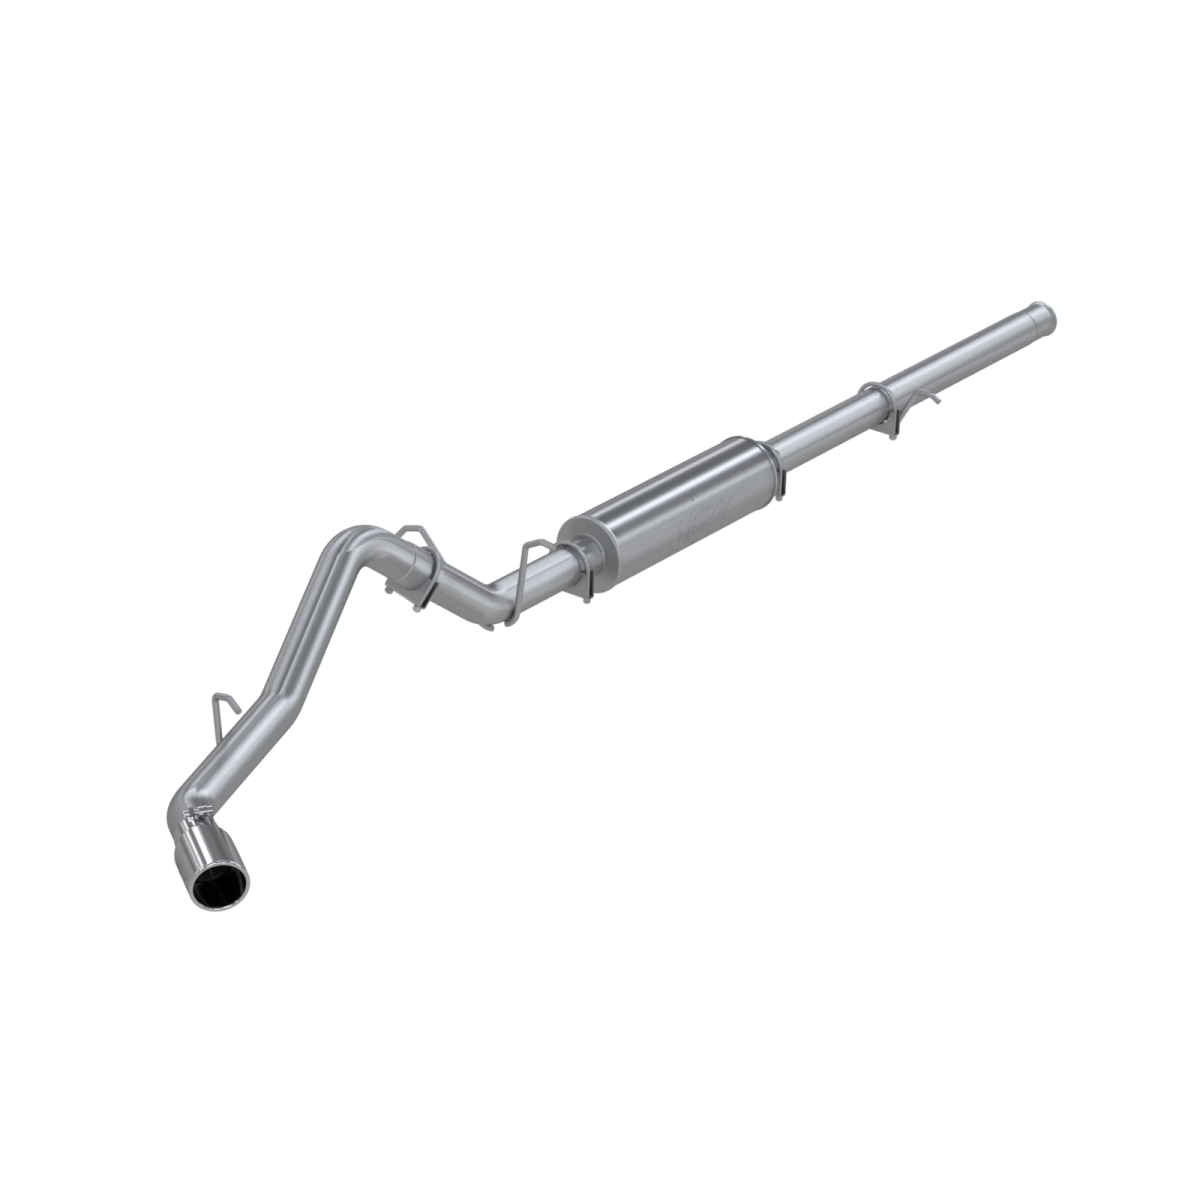 MBRP - MBRP Cat Back Exhaust System Single Side Aluminized Steel For 09-13 Silverado/Sierra 1500 4.8/5.3/6.0L RC/Extended Cab/Crew Cab S5054AL